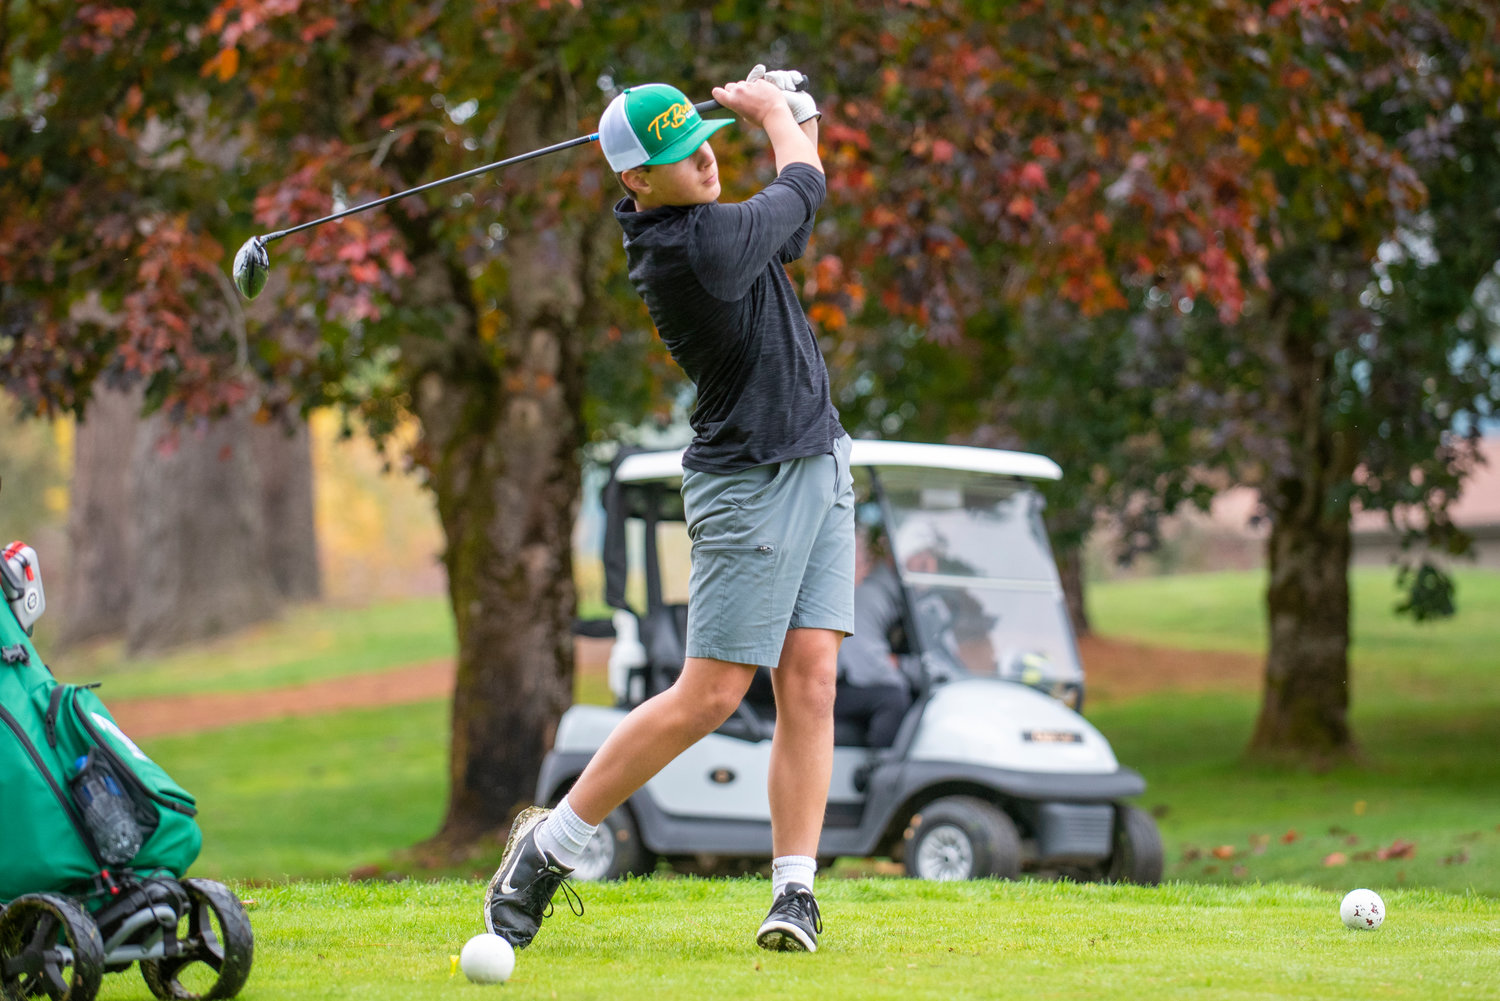 Tumwater's Nolan Campbell tees off on the 18th hole of the 2A Evergreen Conference championship at Riverside Golf Course on Oct. 18, 2021.